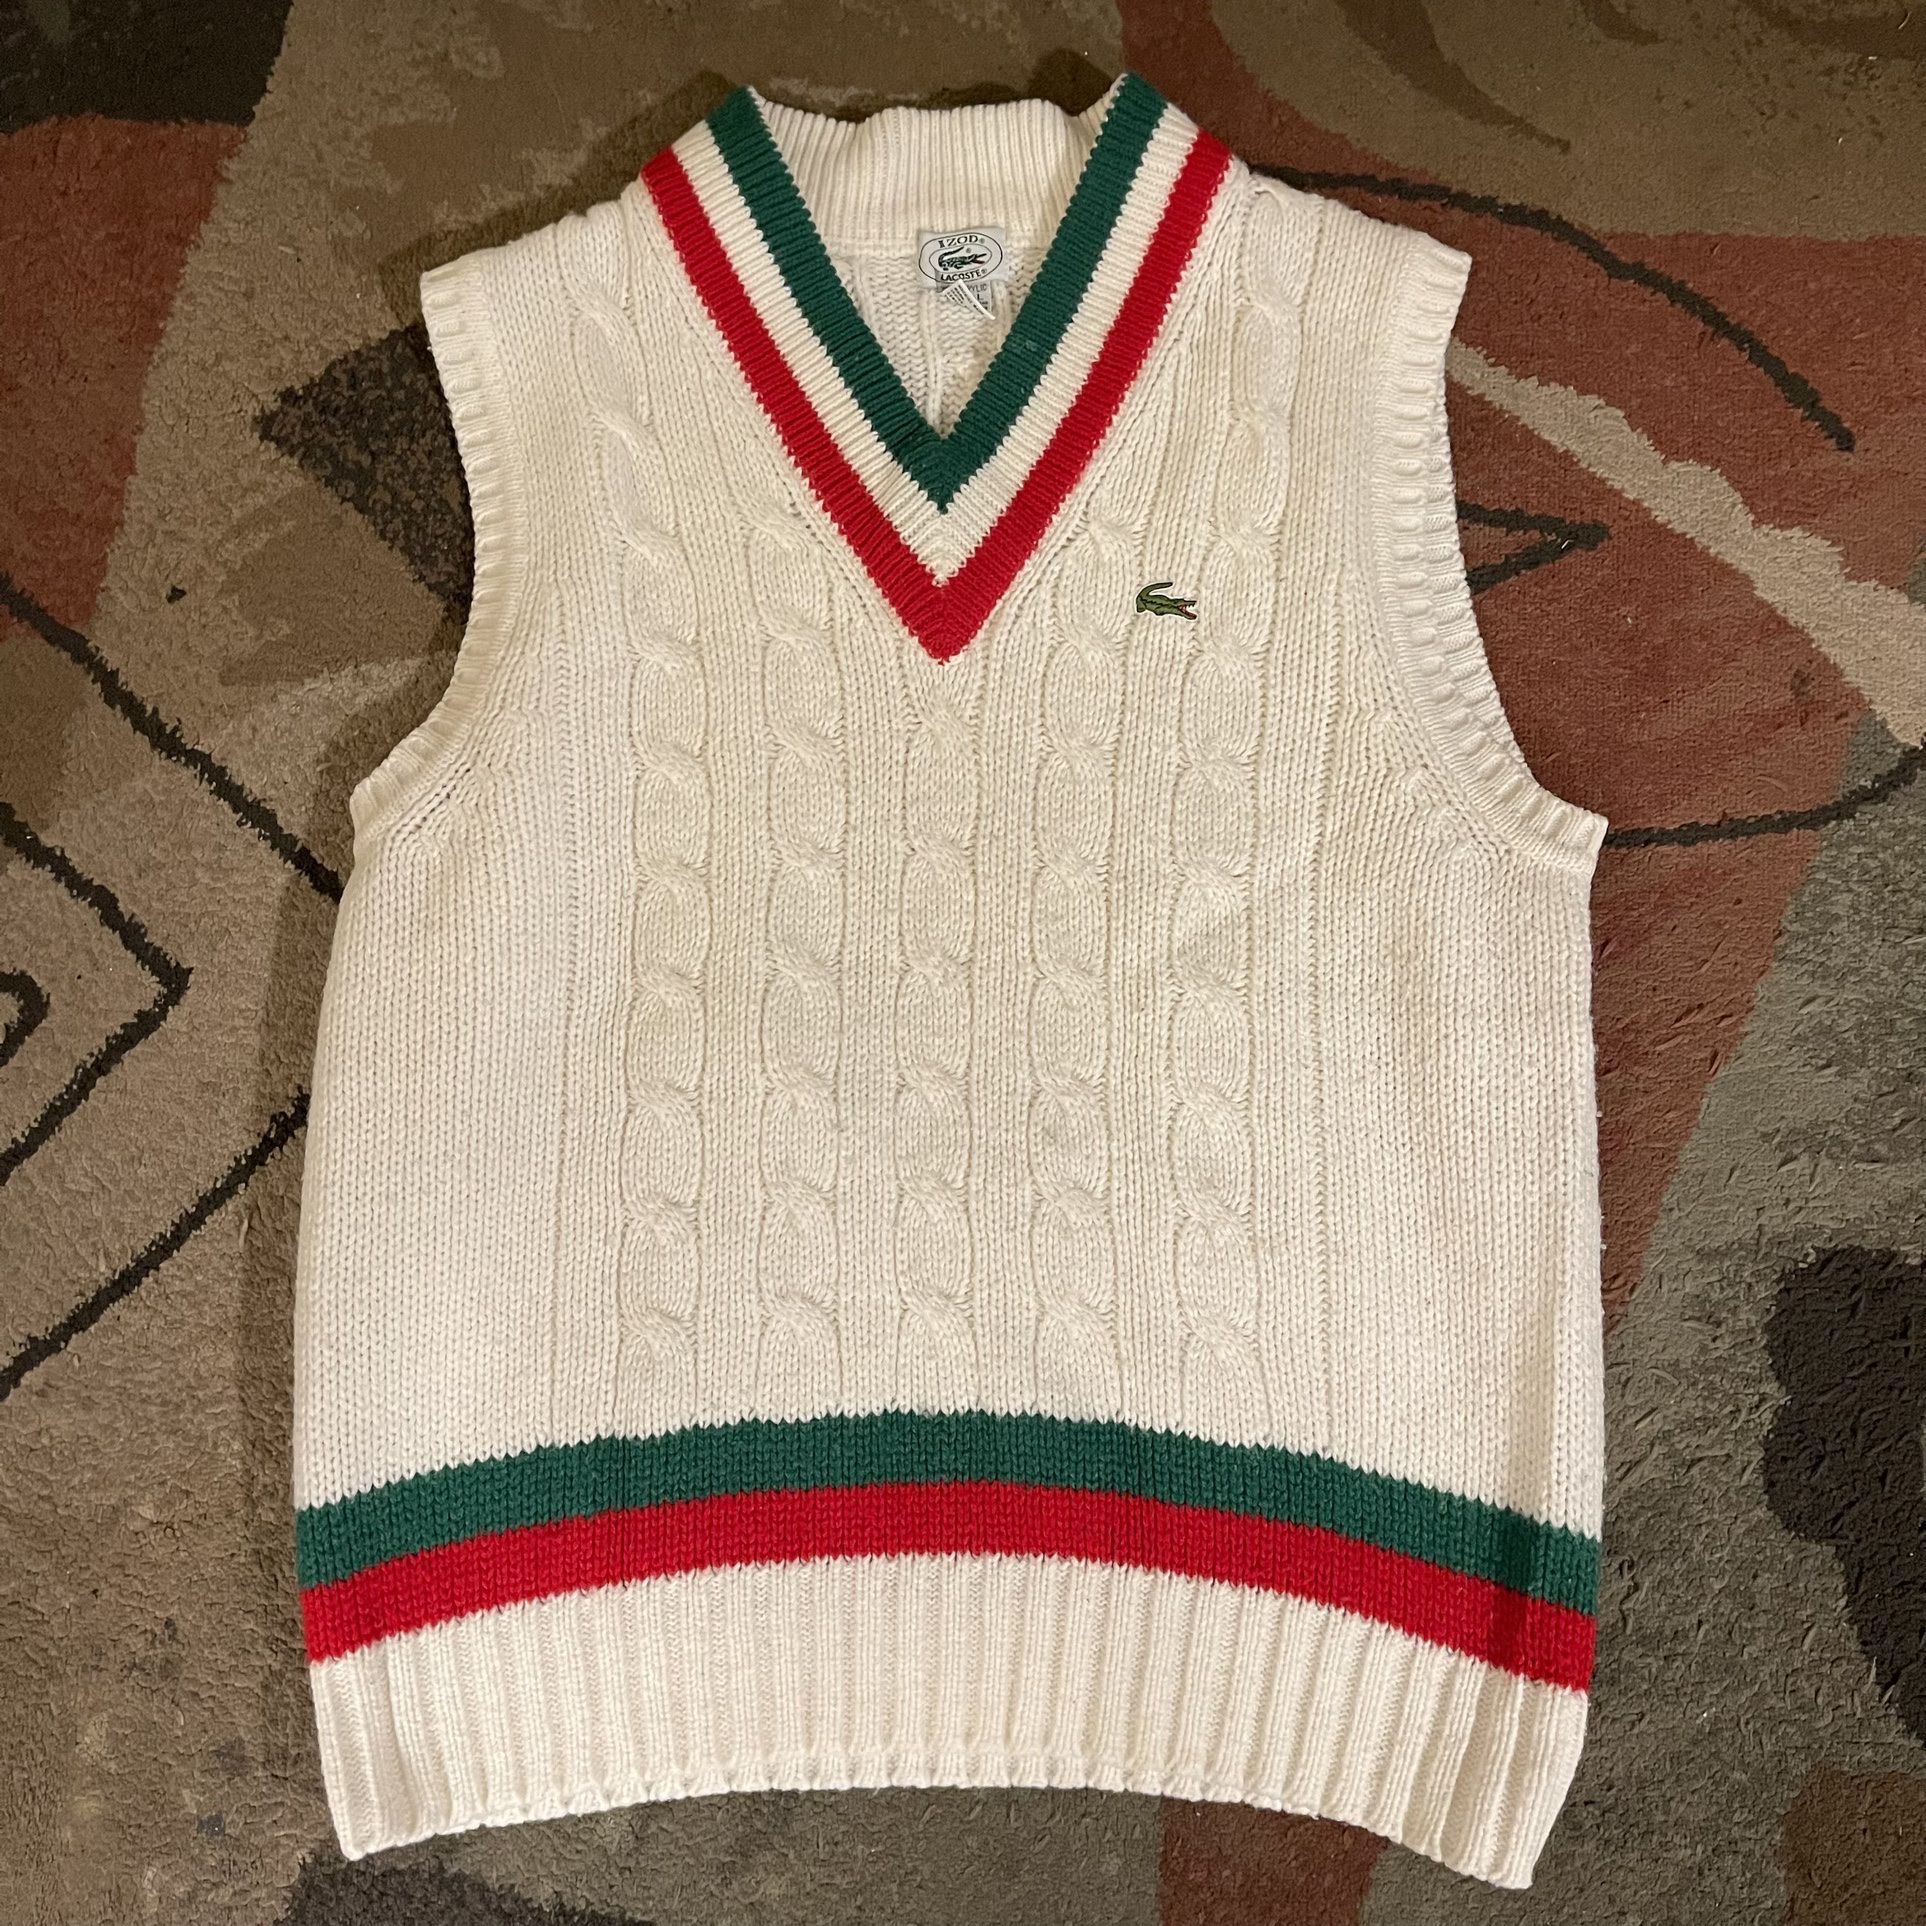 velstand tælle Berolige Vintage 1980s Lacoste 100% Acrylic Knitted White Green Red Sweater Vest  Size L for Sale in Los Angeles, CA - OfferUp